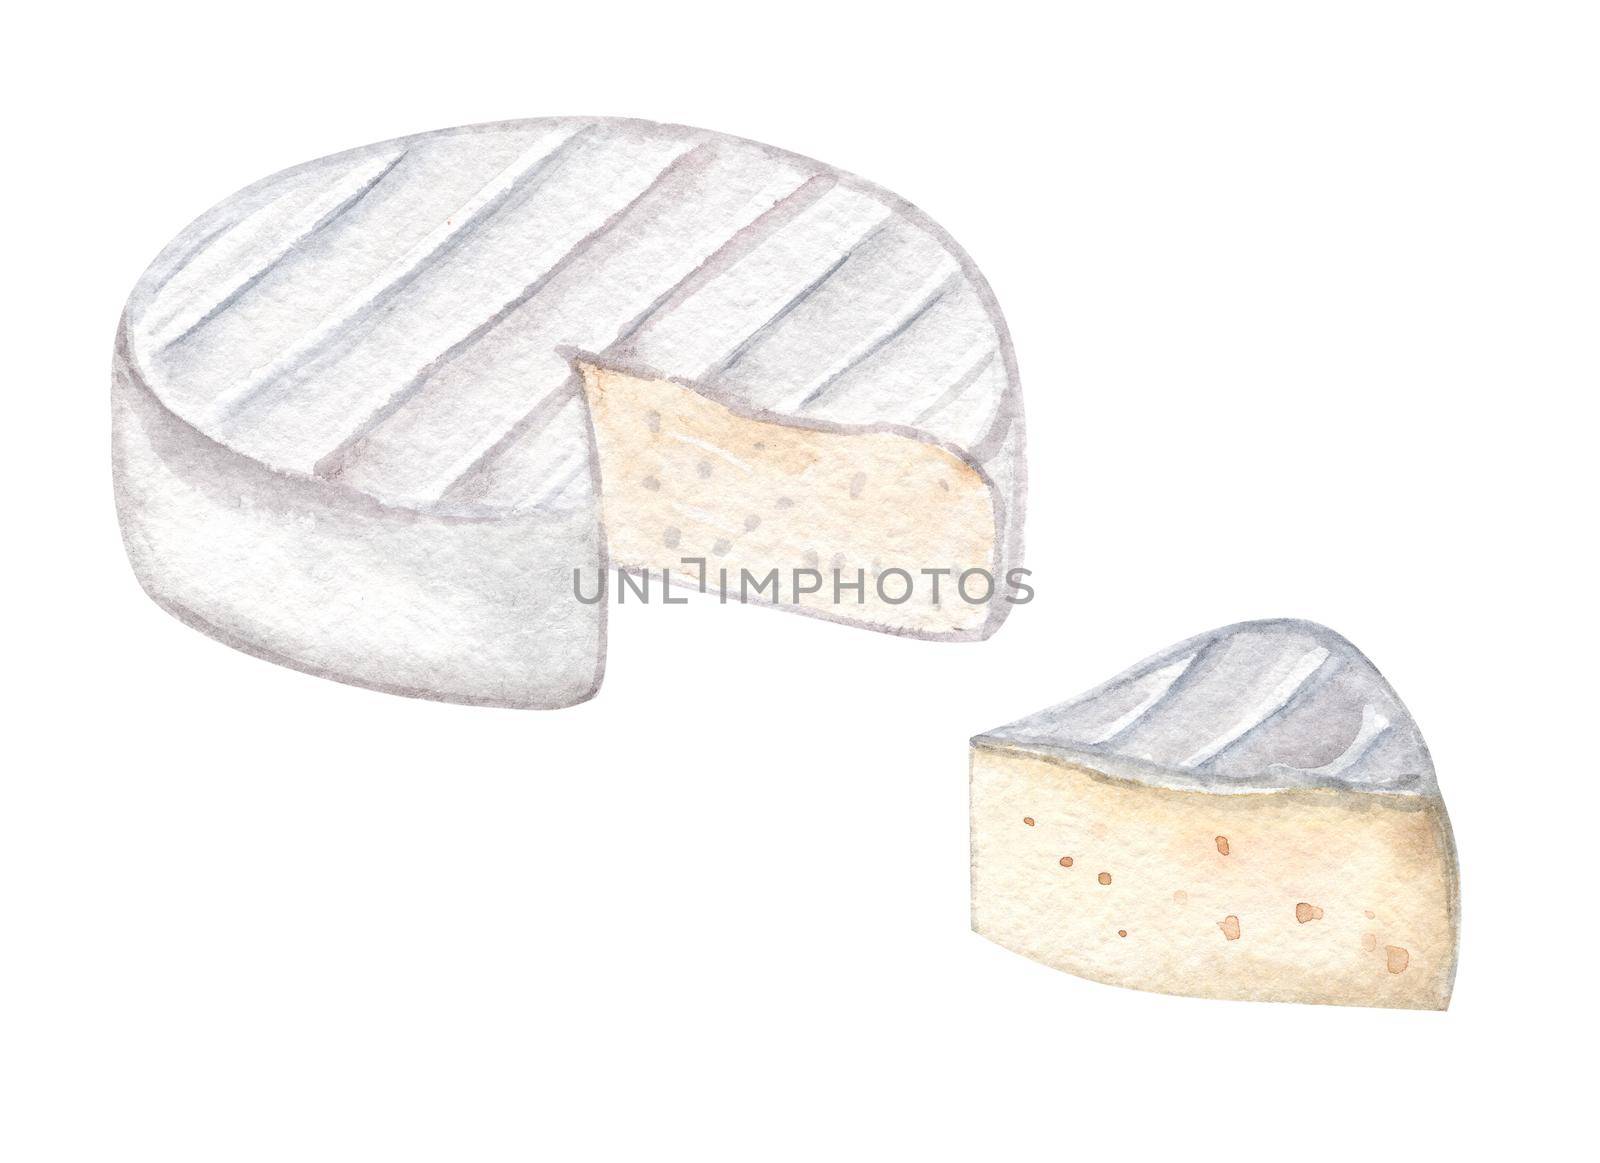 Watercolor camembert cheese pieces set isolated on white. Hand drawn brie illustration by dreamloud